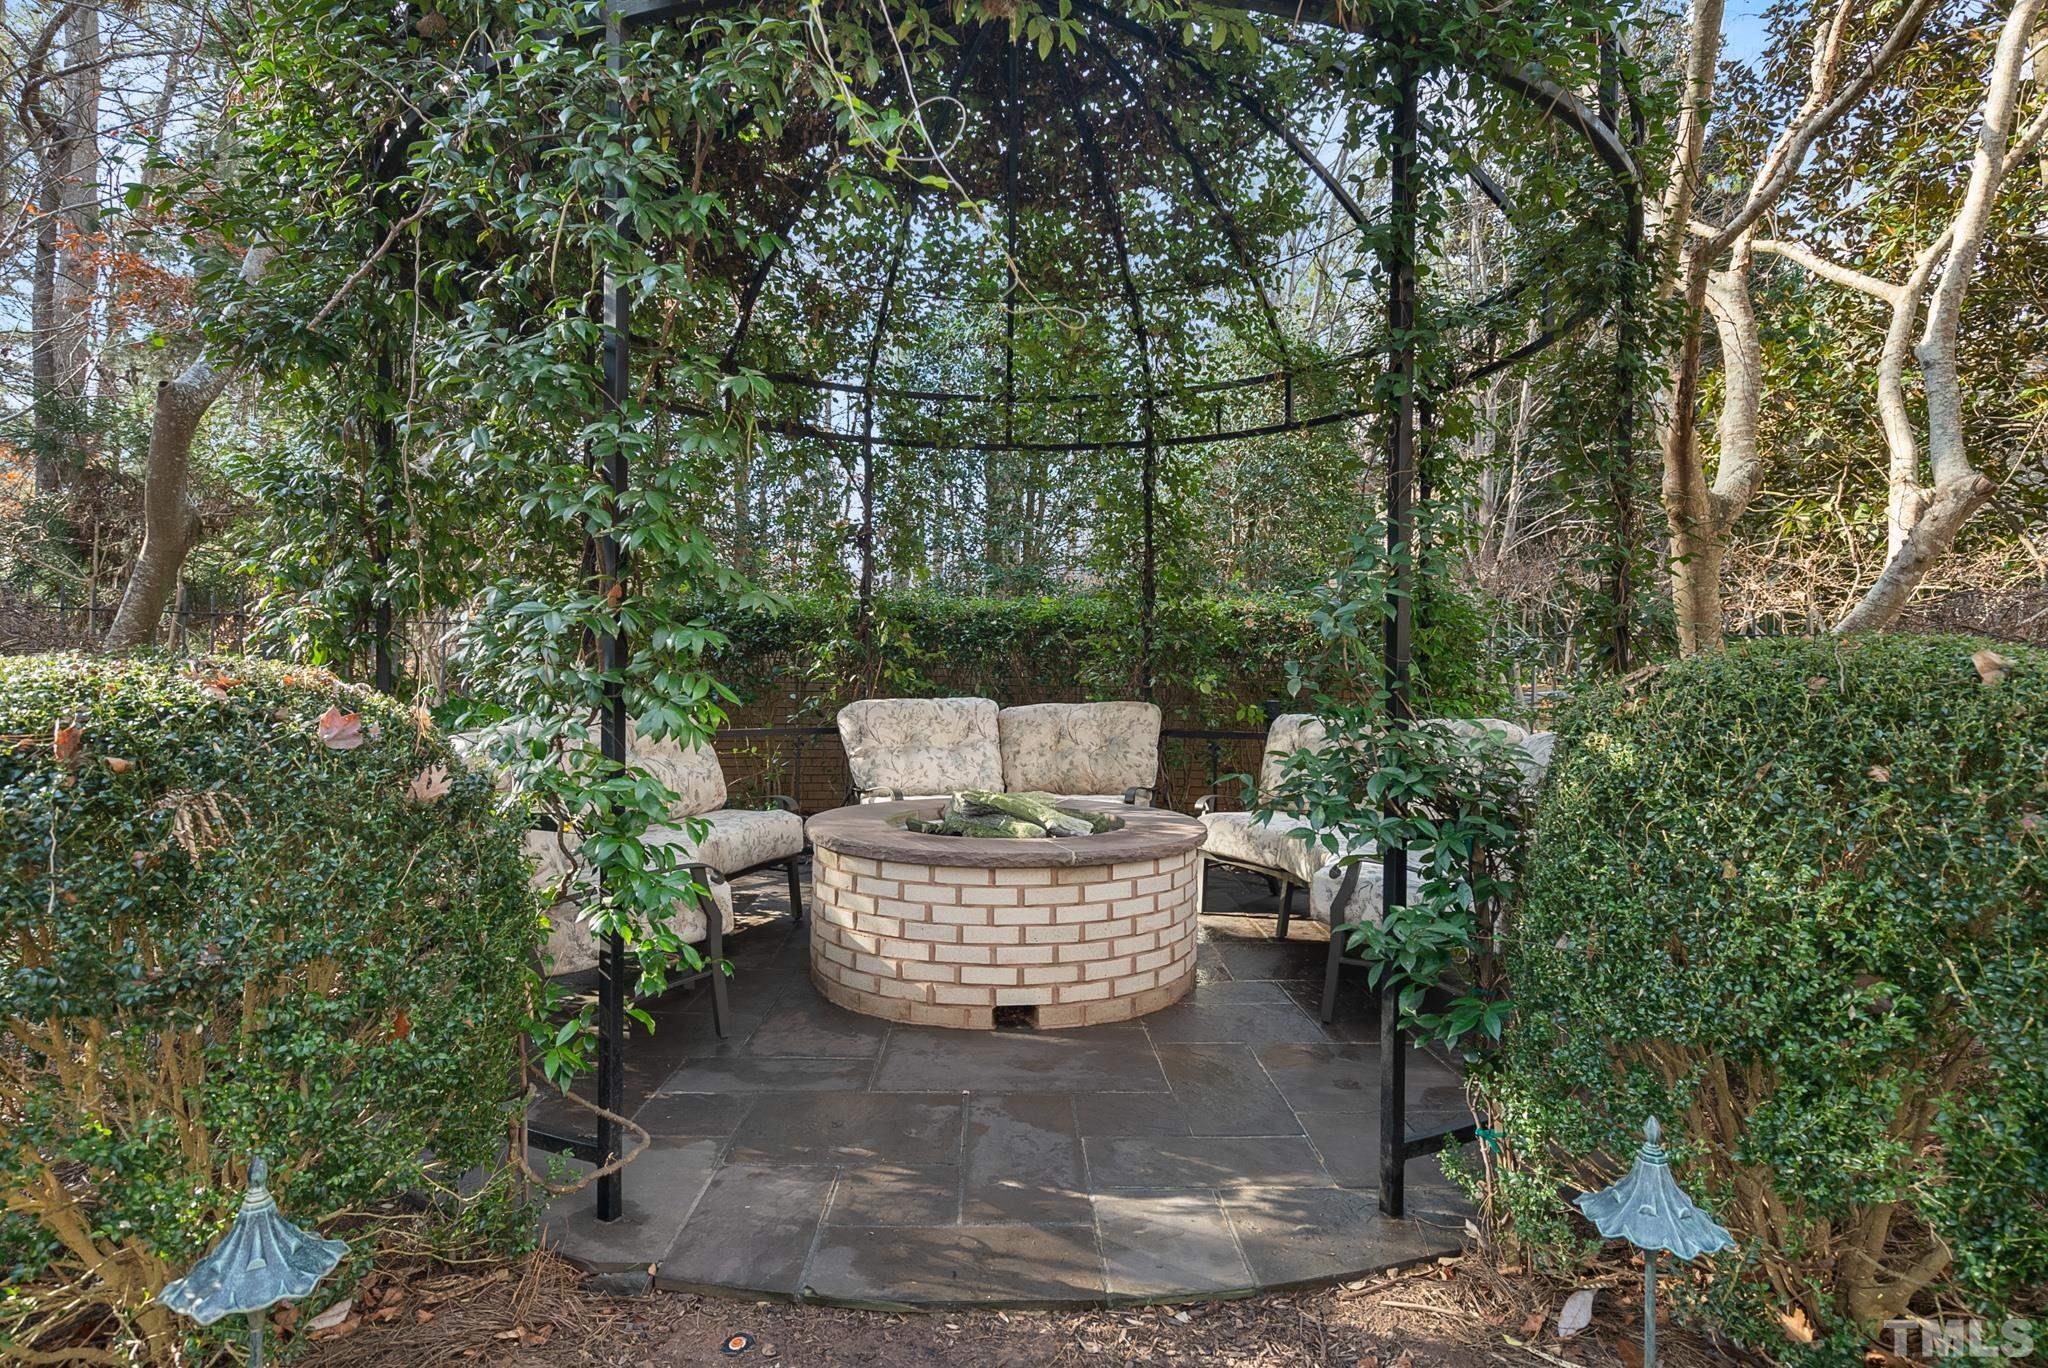 Garden in the backyard with gas fire pit.